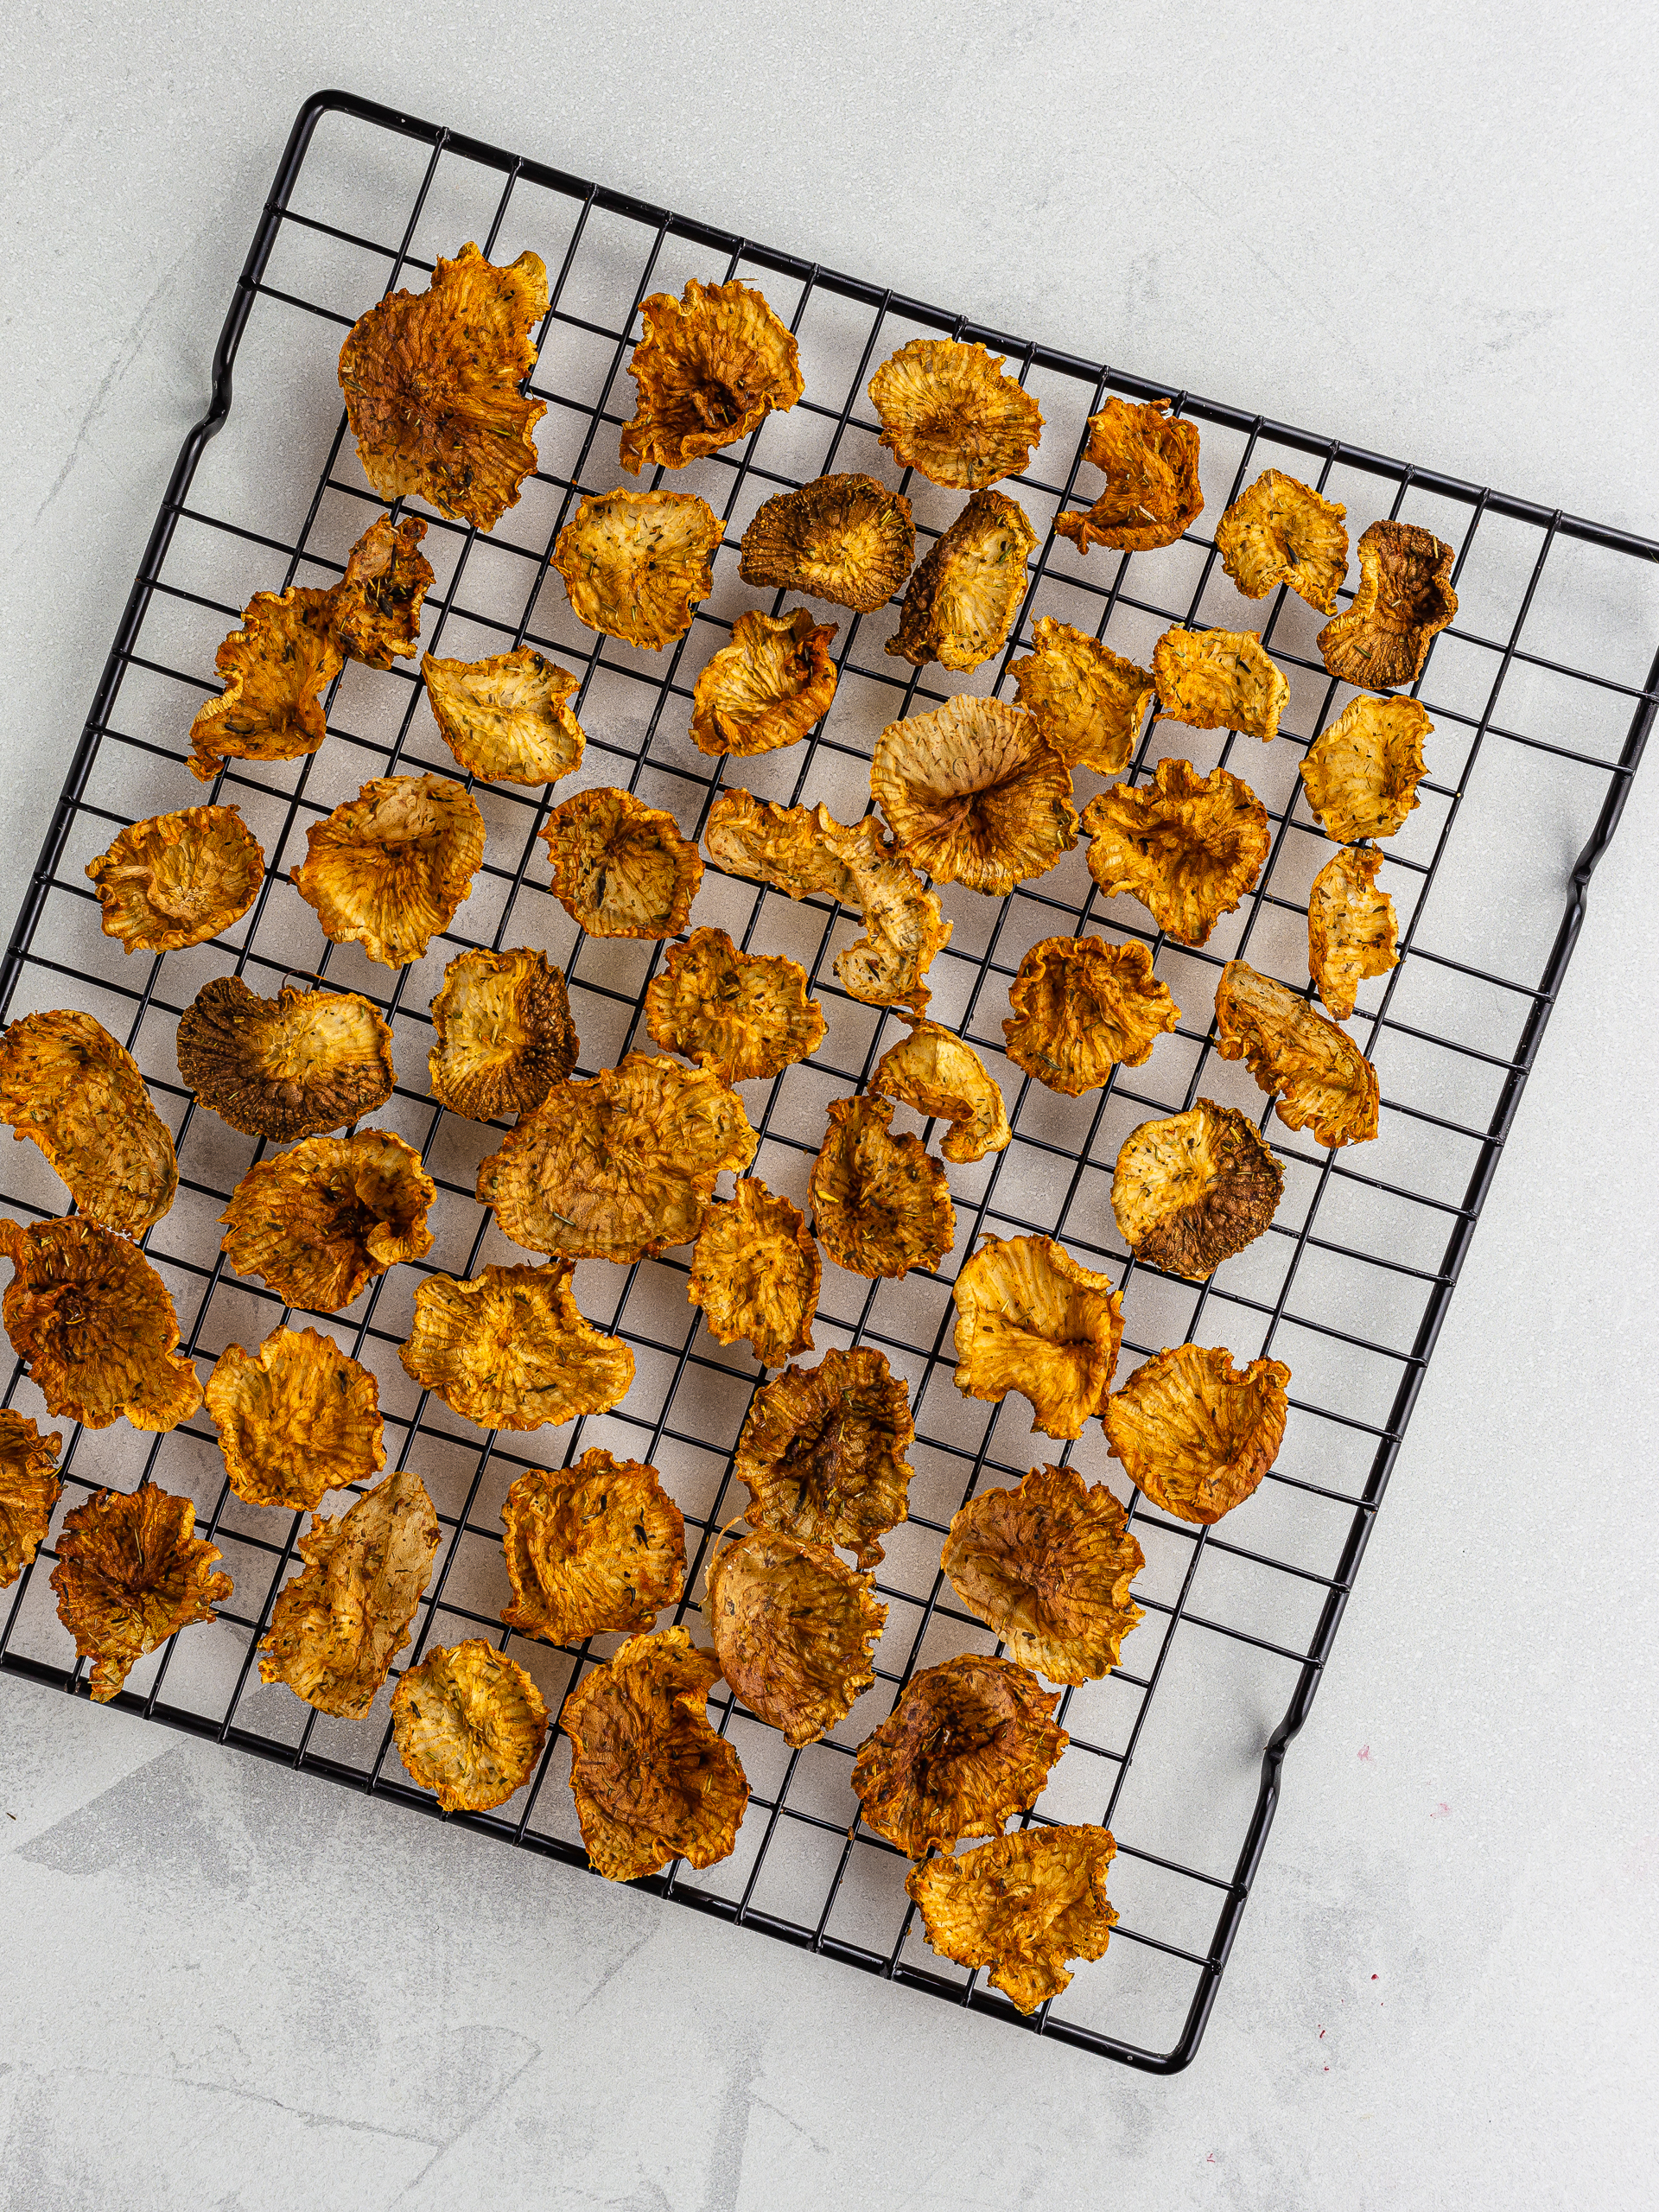 oven-baked daikon chips on a rack